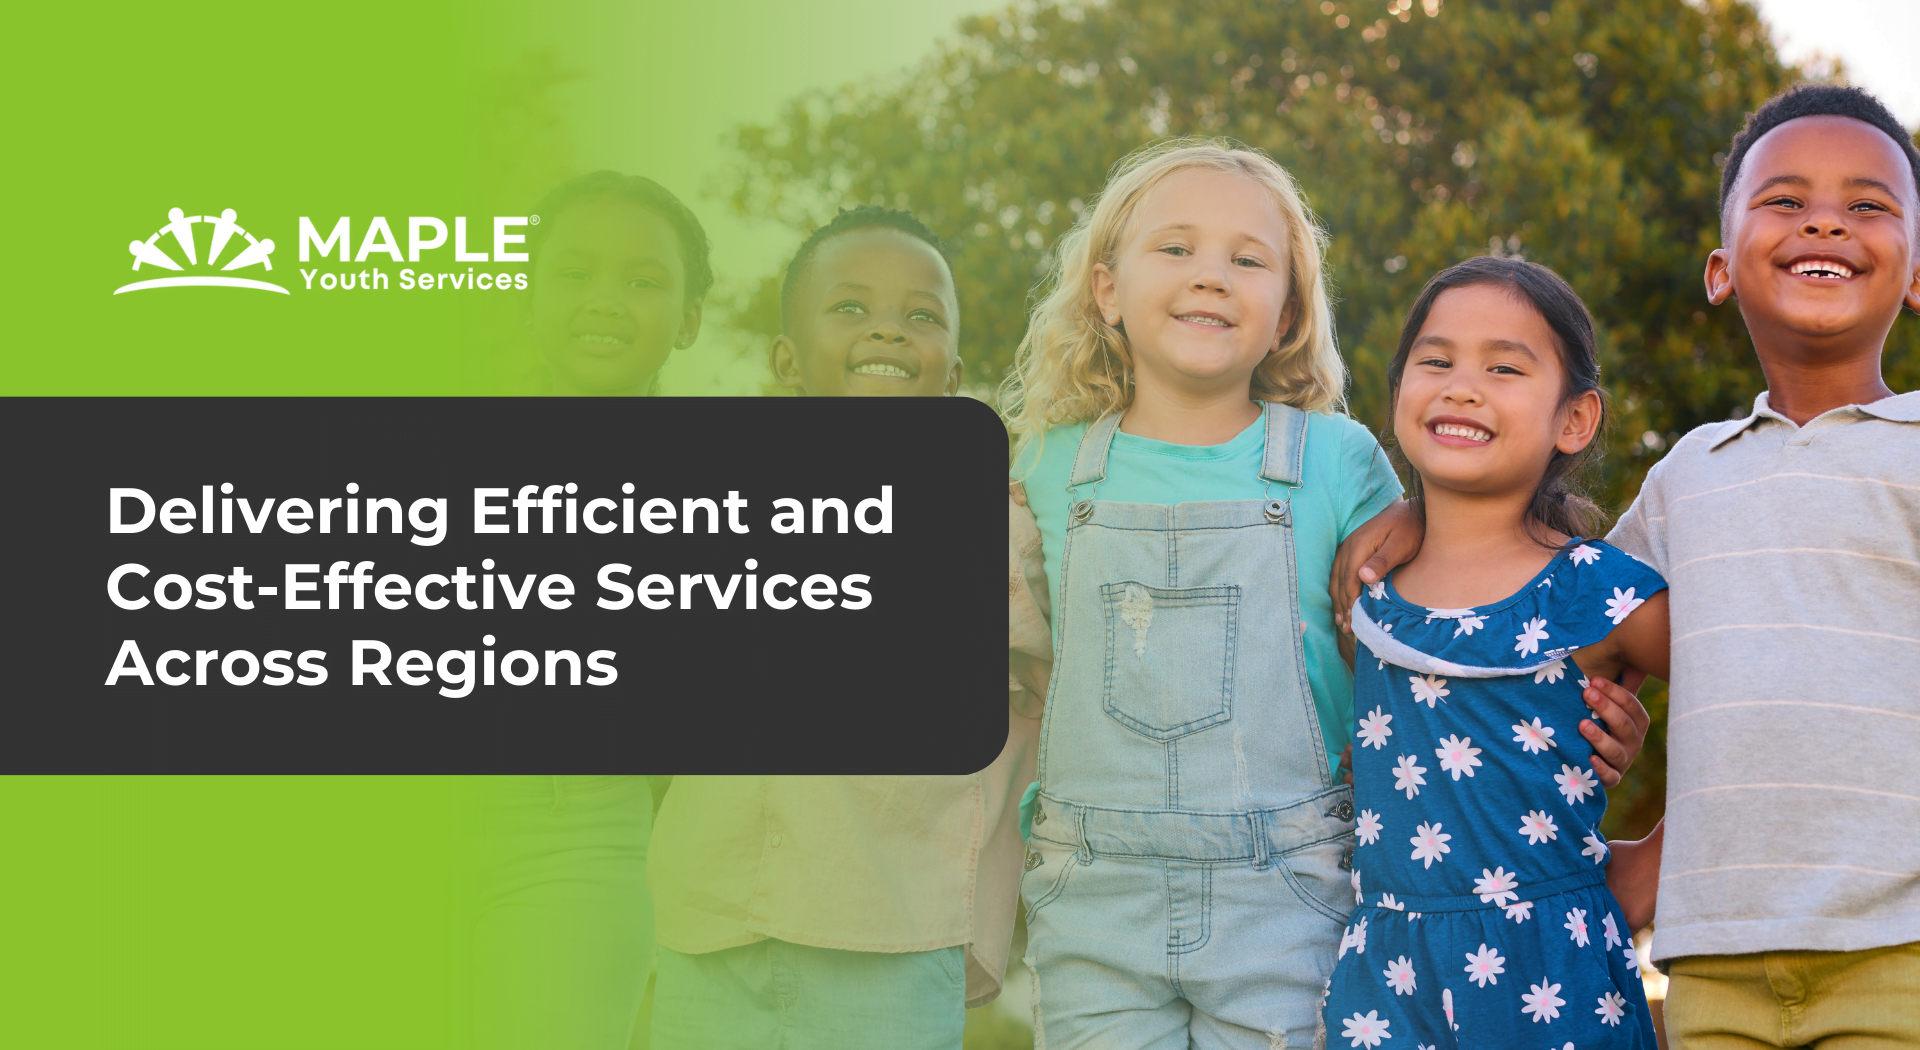 Delivering Efficient and Cost-Effective Services Across Regions